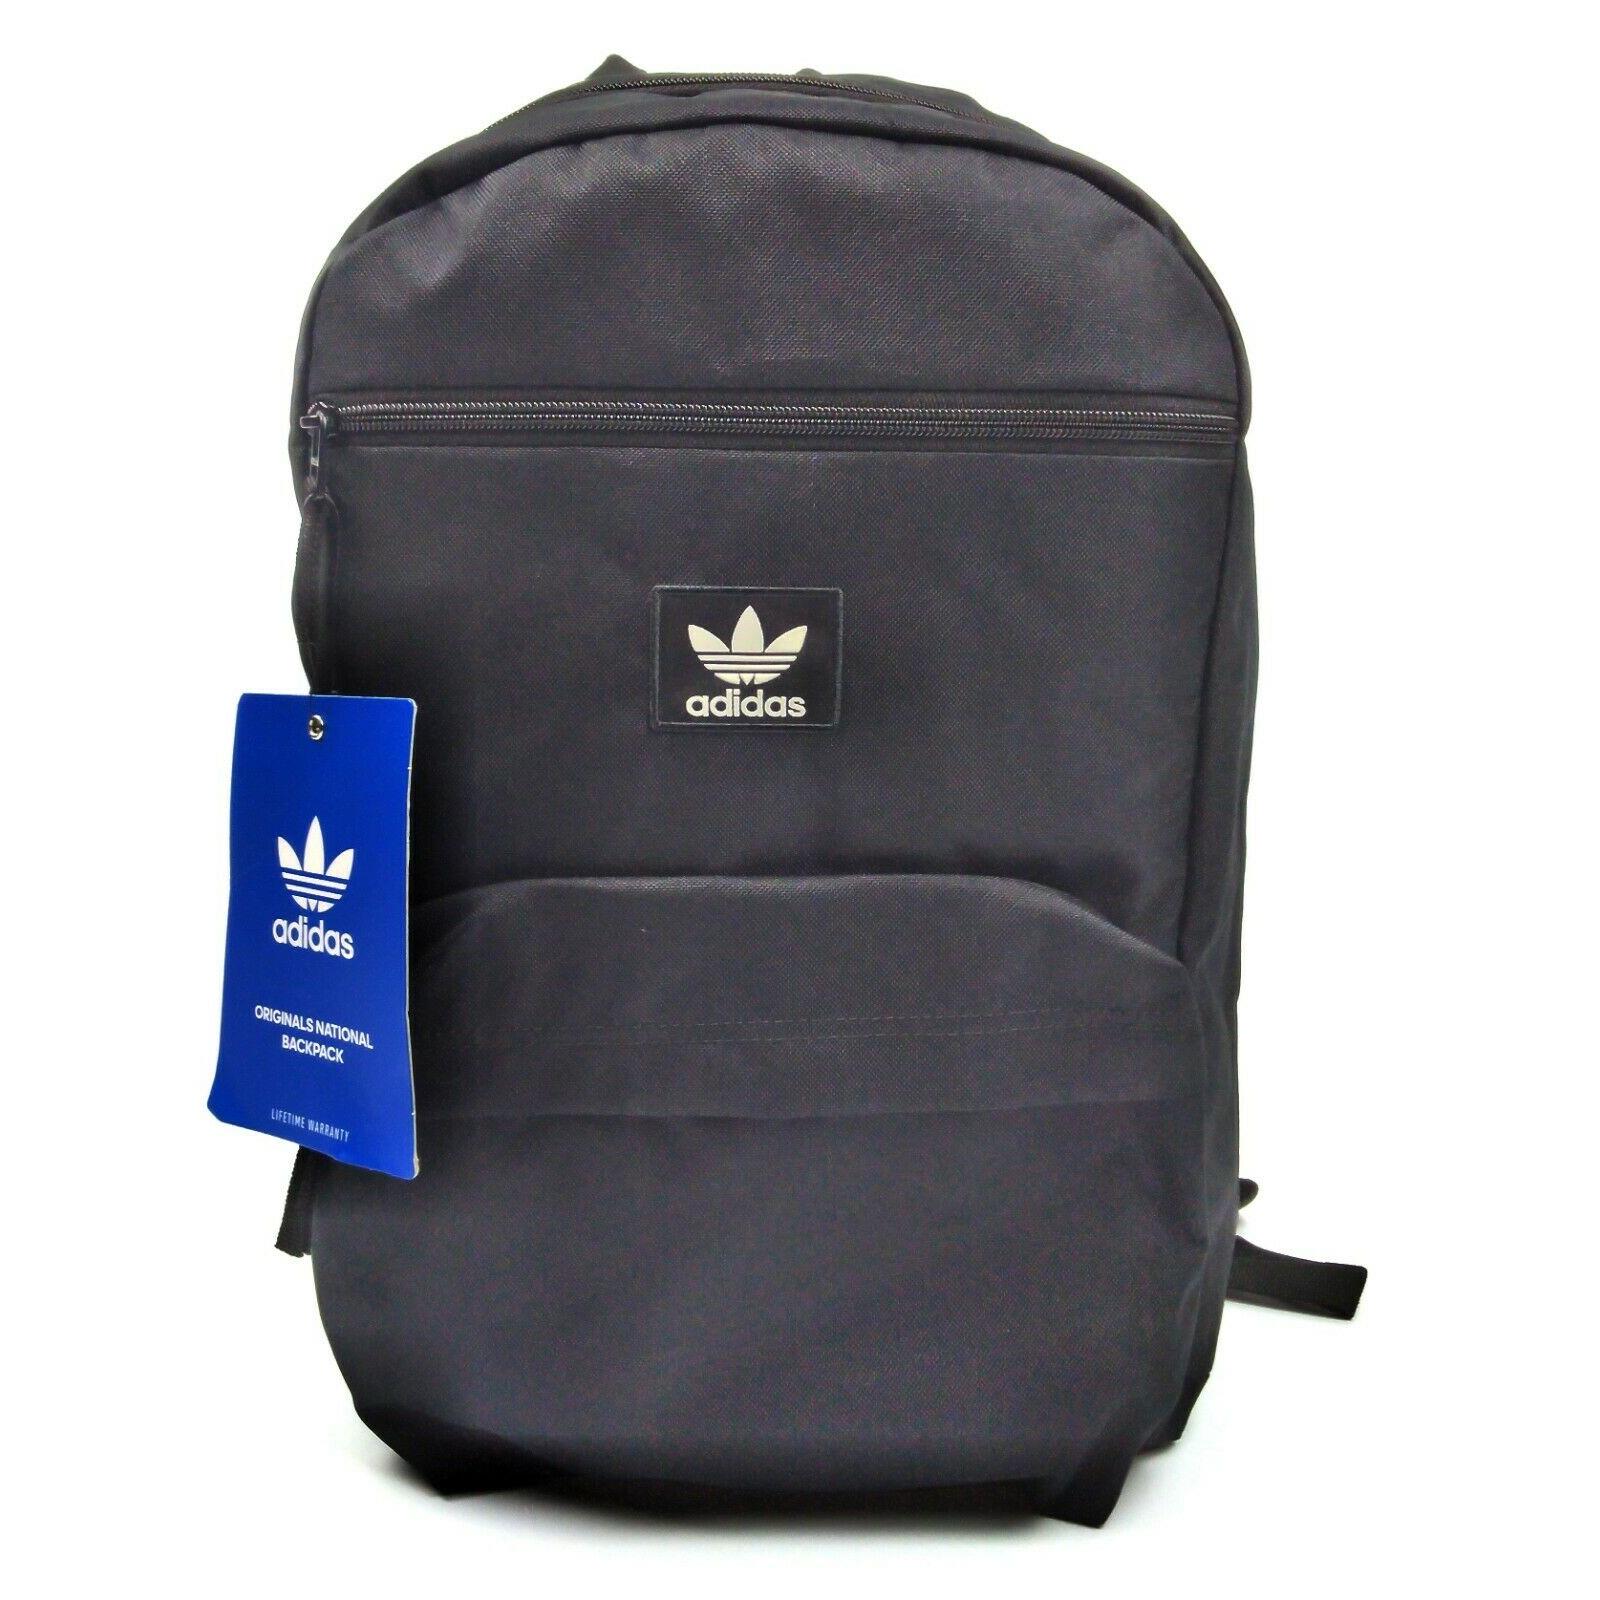 Adidas Originals National Unisex All Day Backpack with 15.4`` Laptop Storage Black